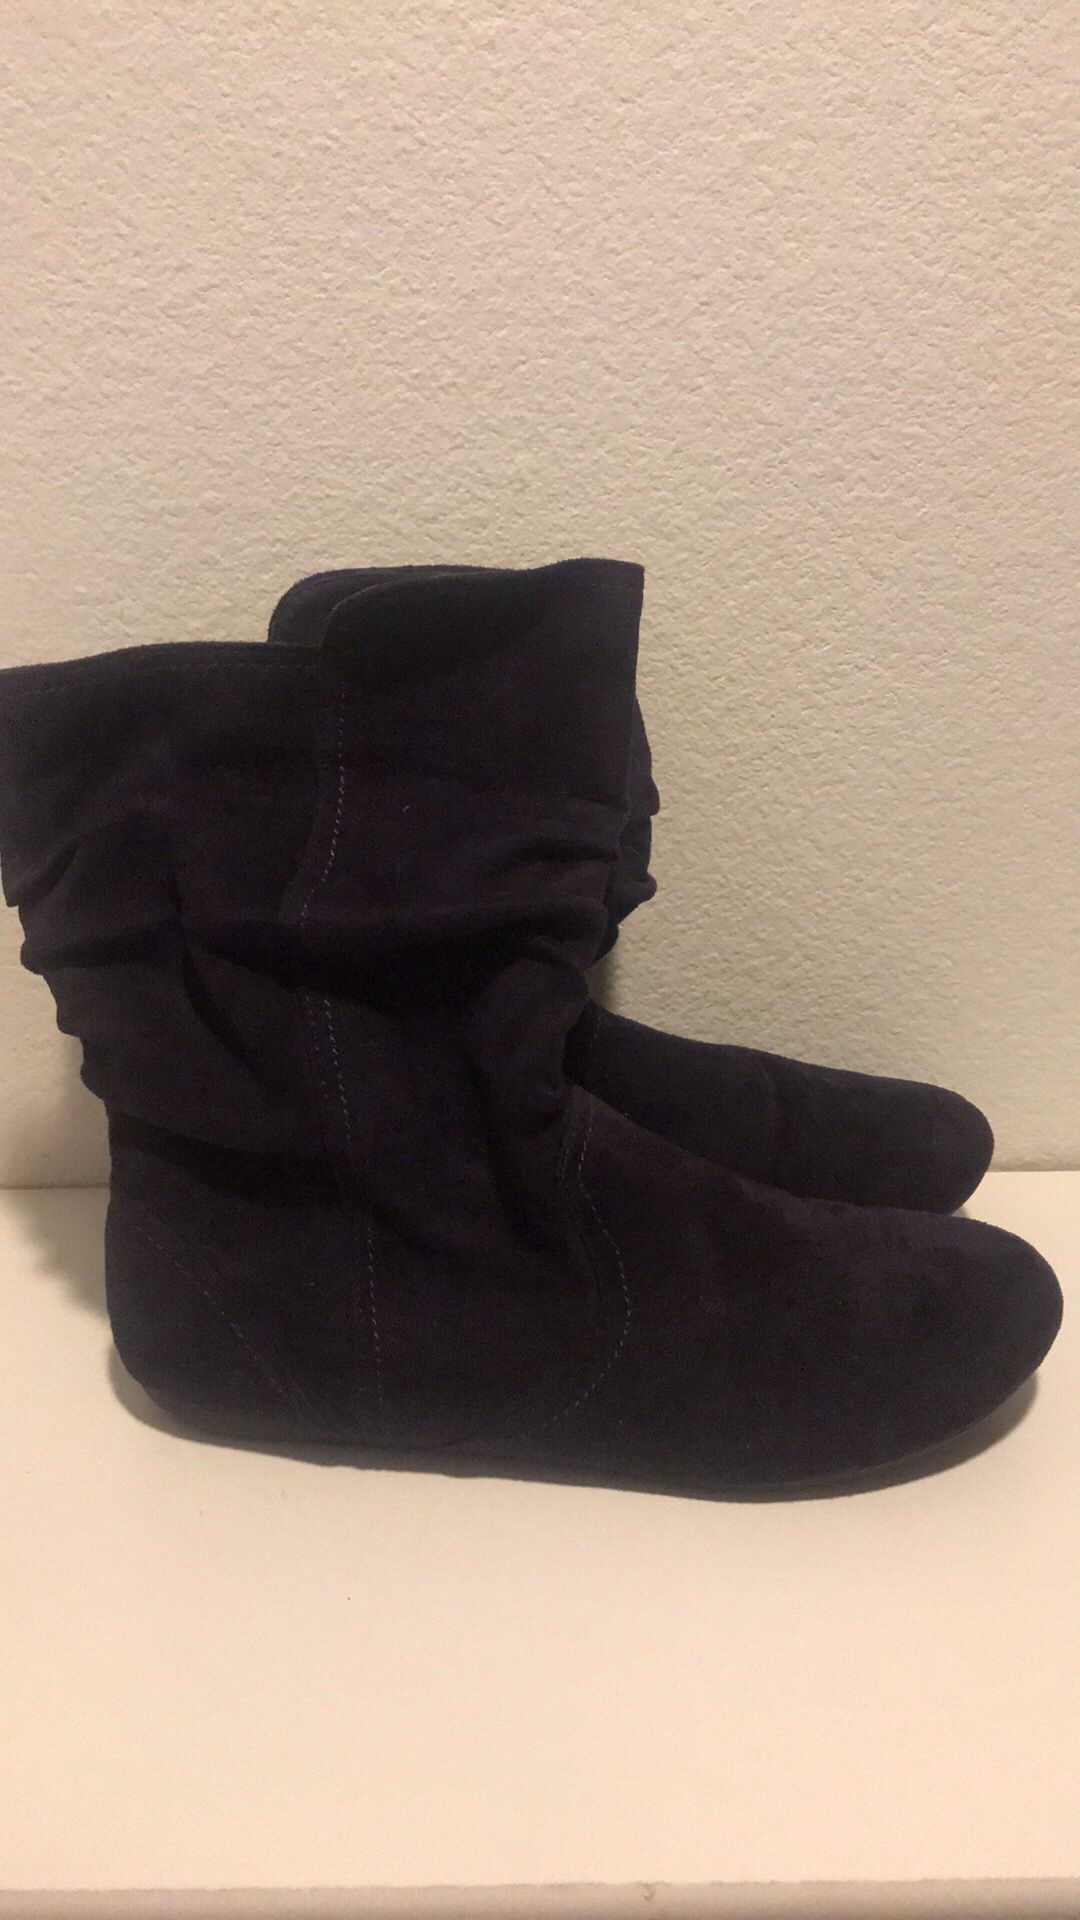 Jcpenny boots